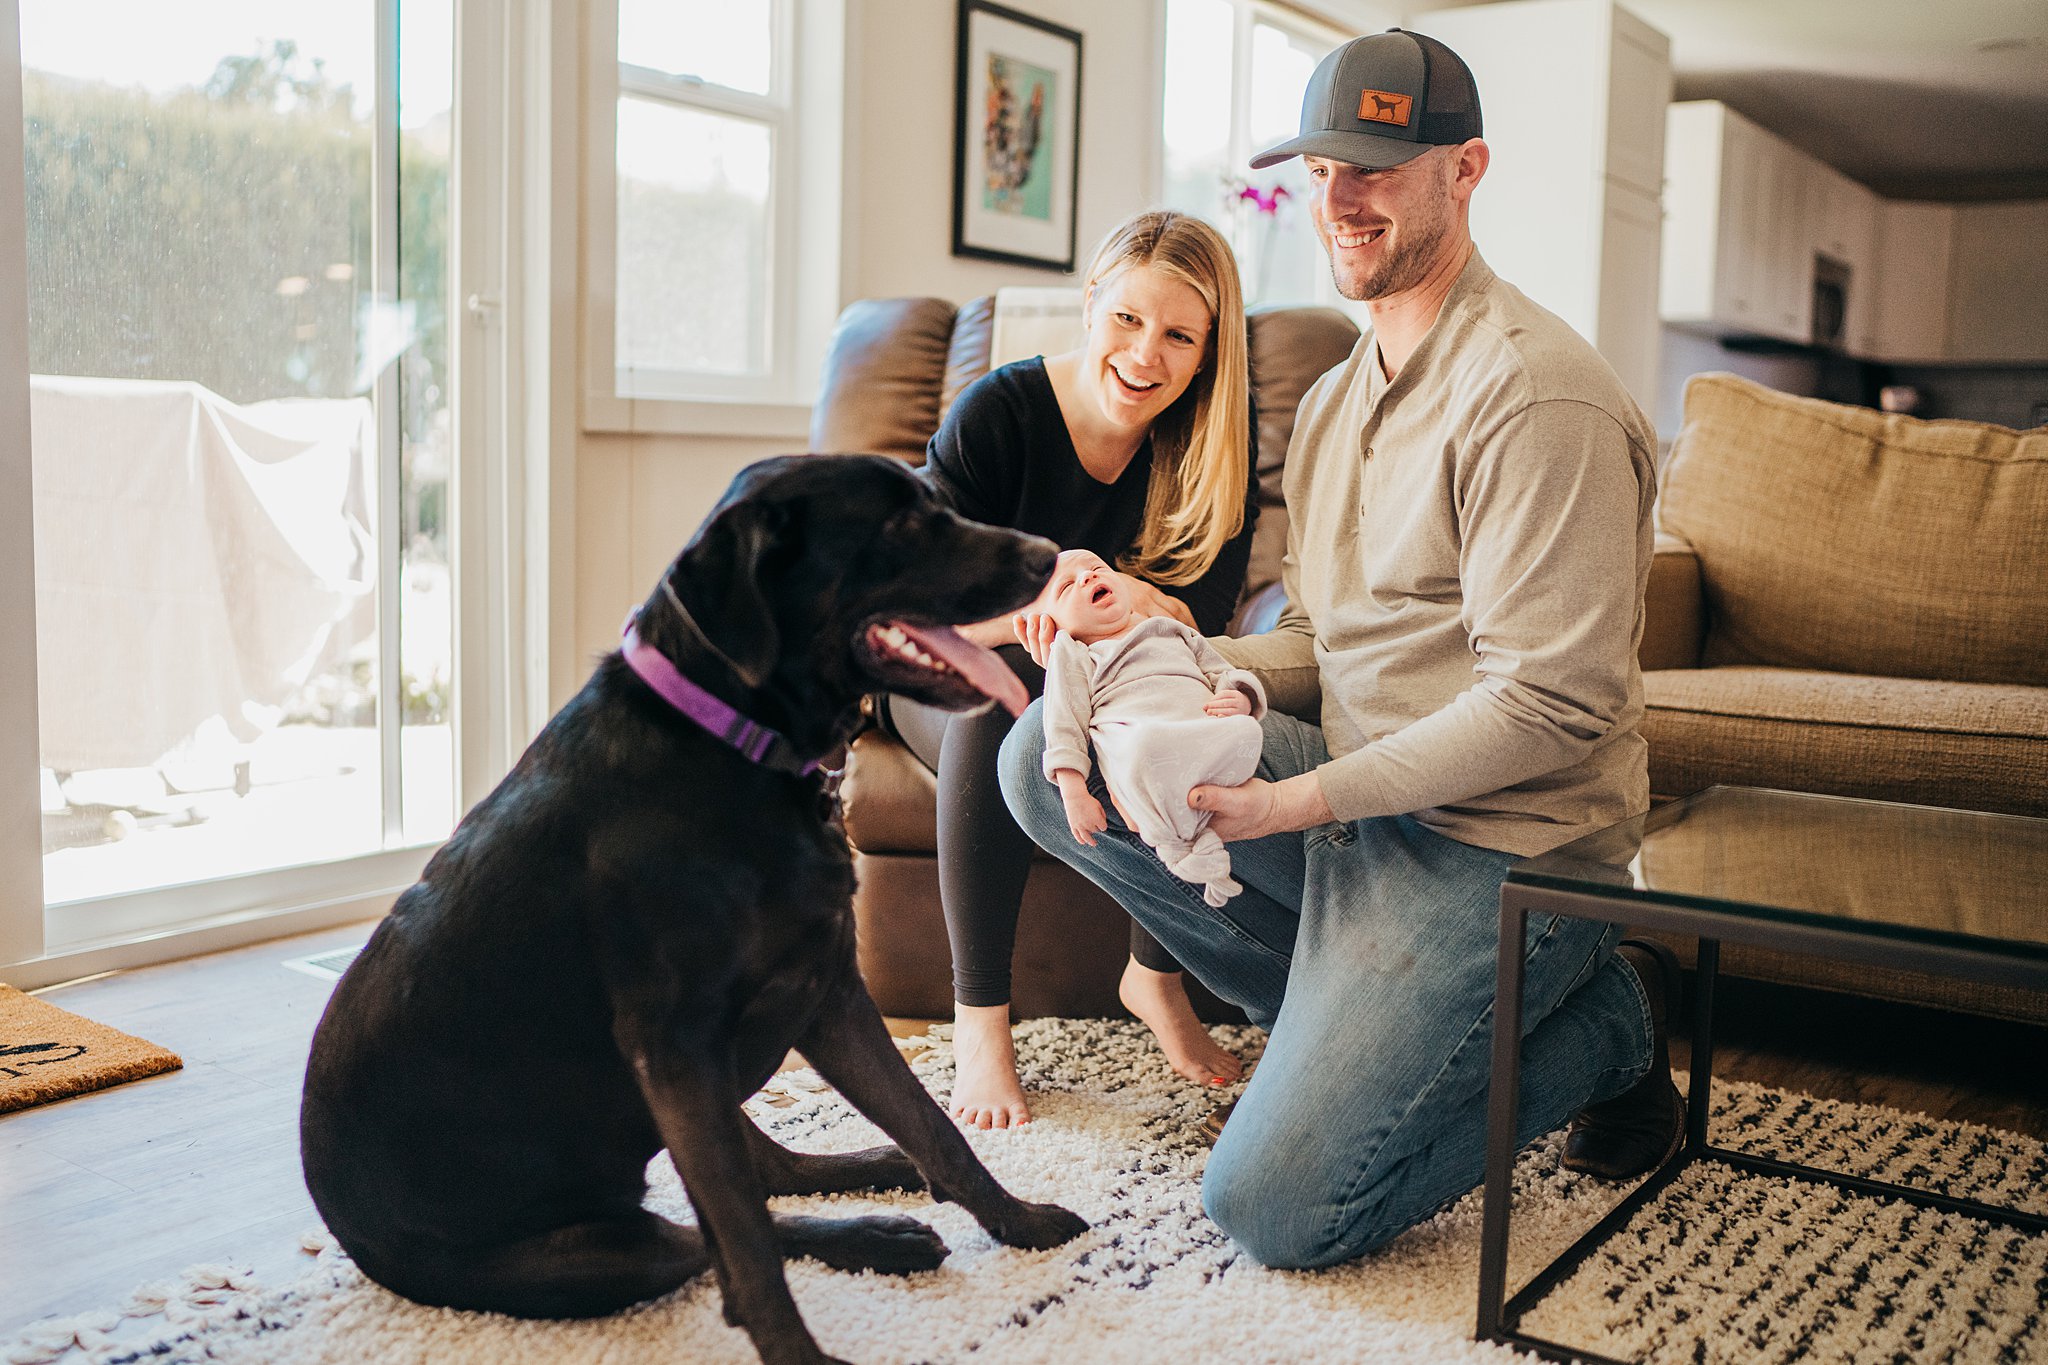 A new father shows his newborn baby to the family black lab while mom sits on a leather chair in living room fit4mom eastside